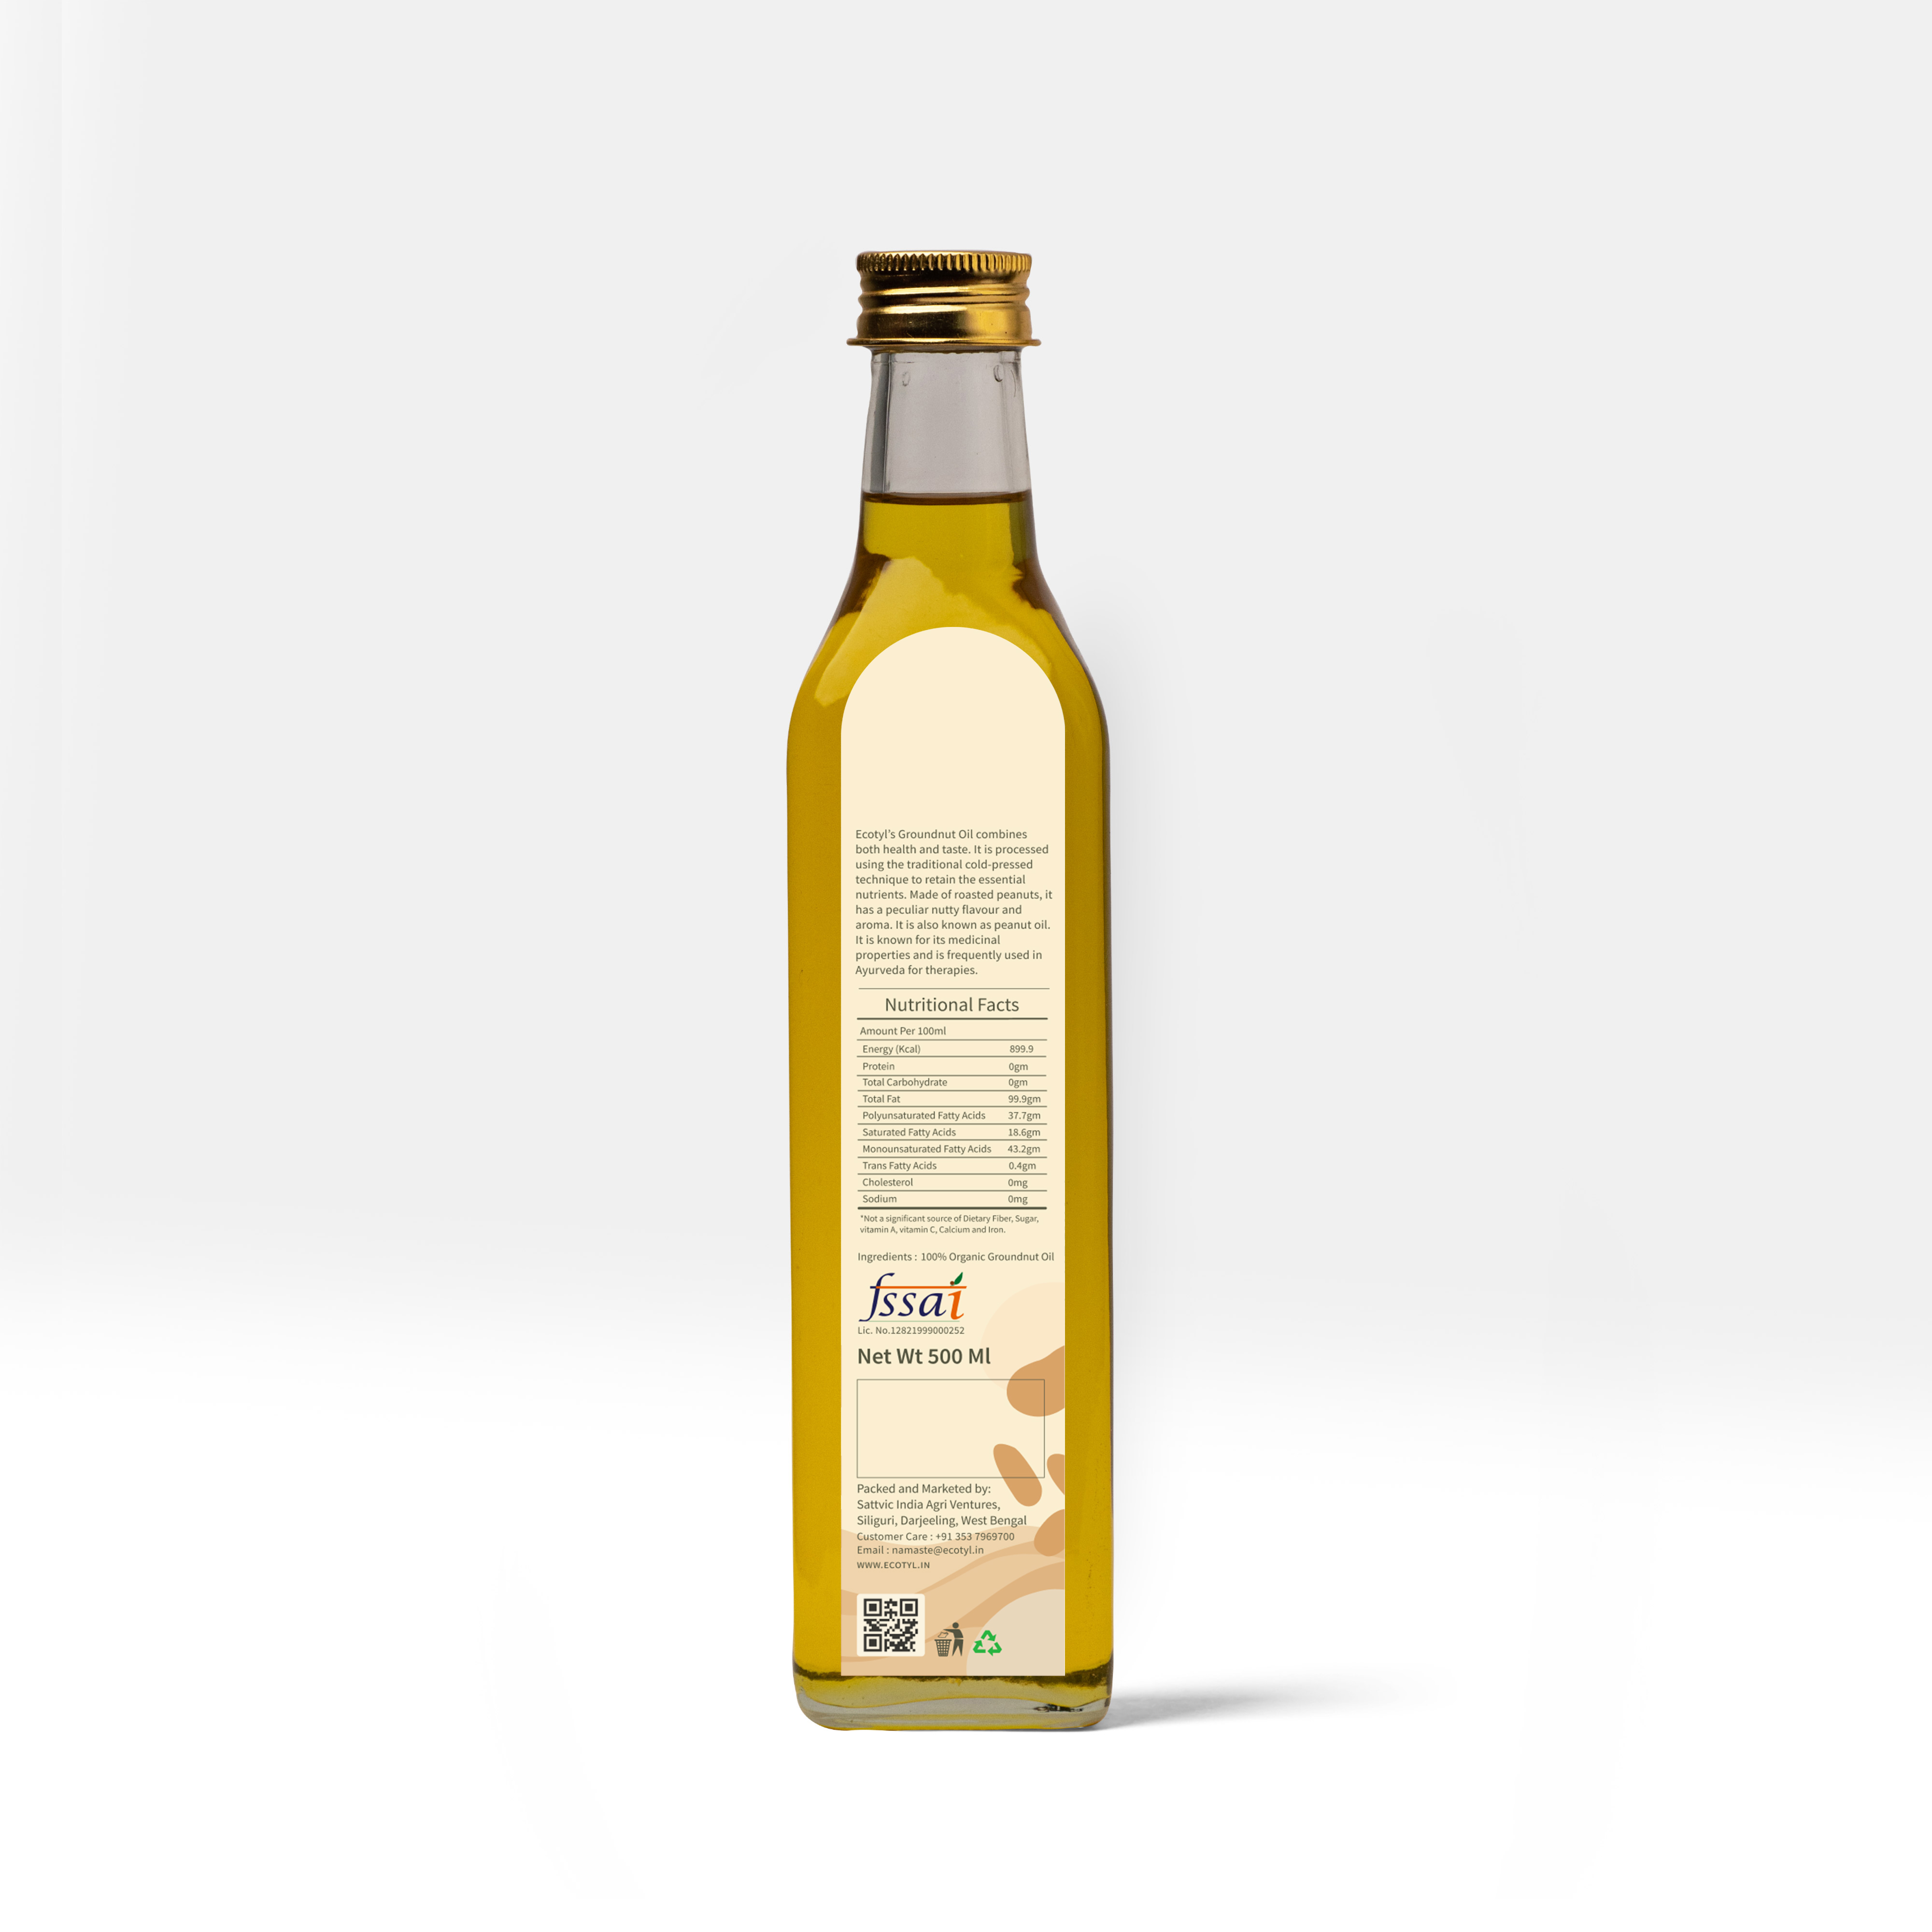 Buy Ecotyl Organic Cold-Pressed Groundnut Oil - 500 ml at Best Price Online